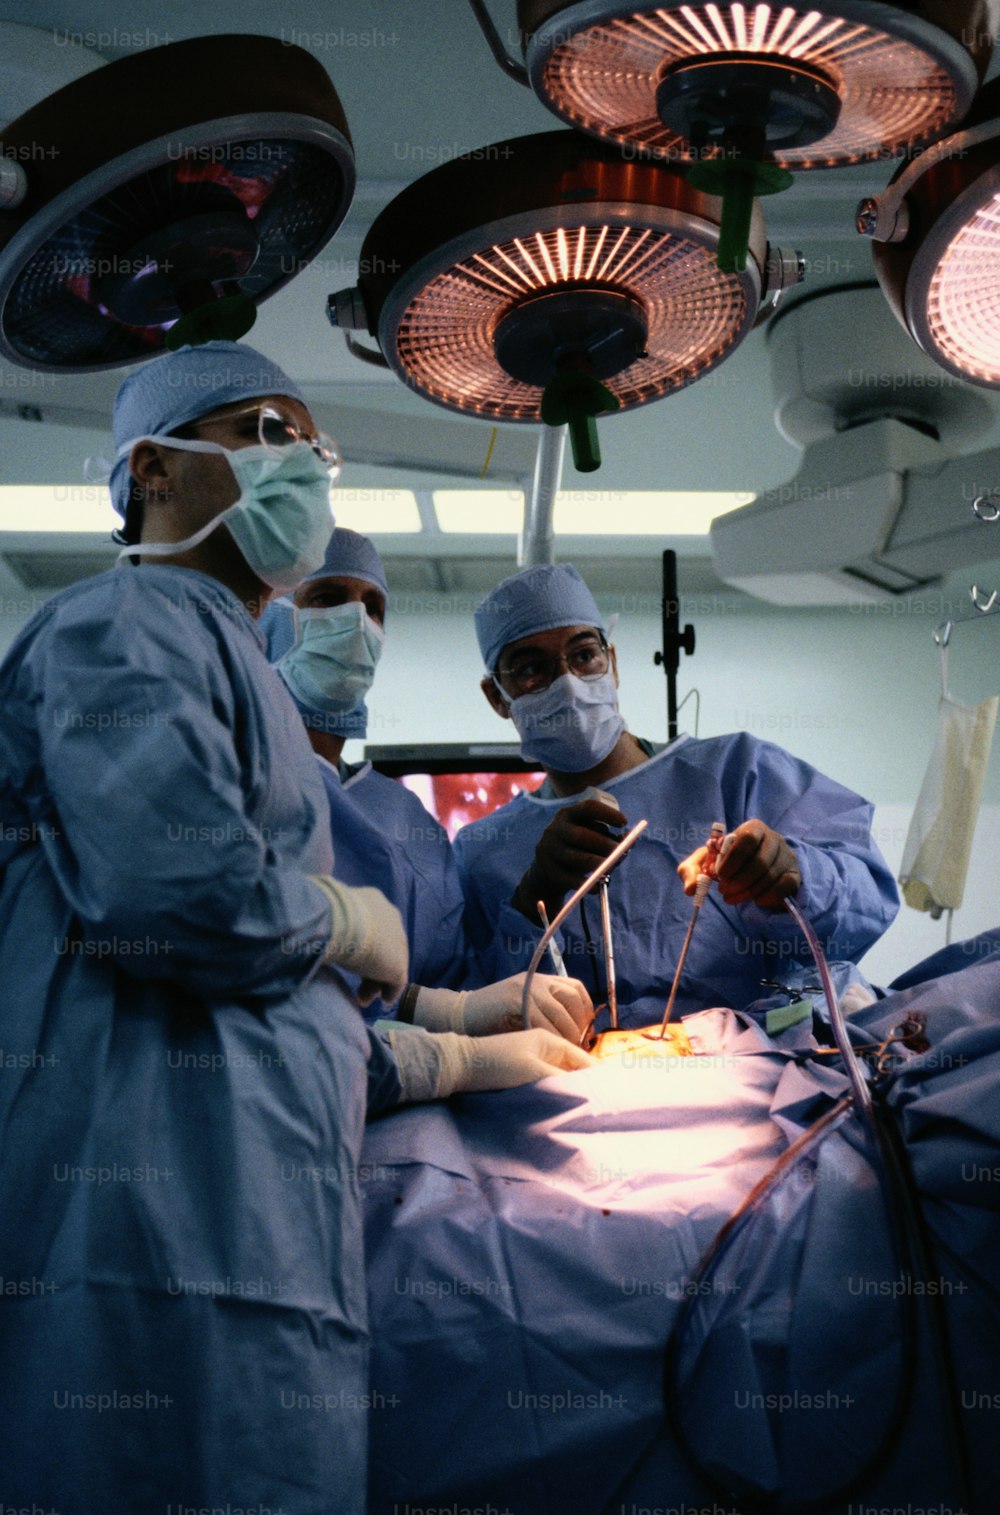 a group of doctors performing surgery on a patient